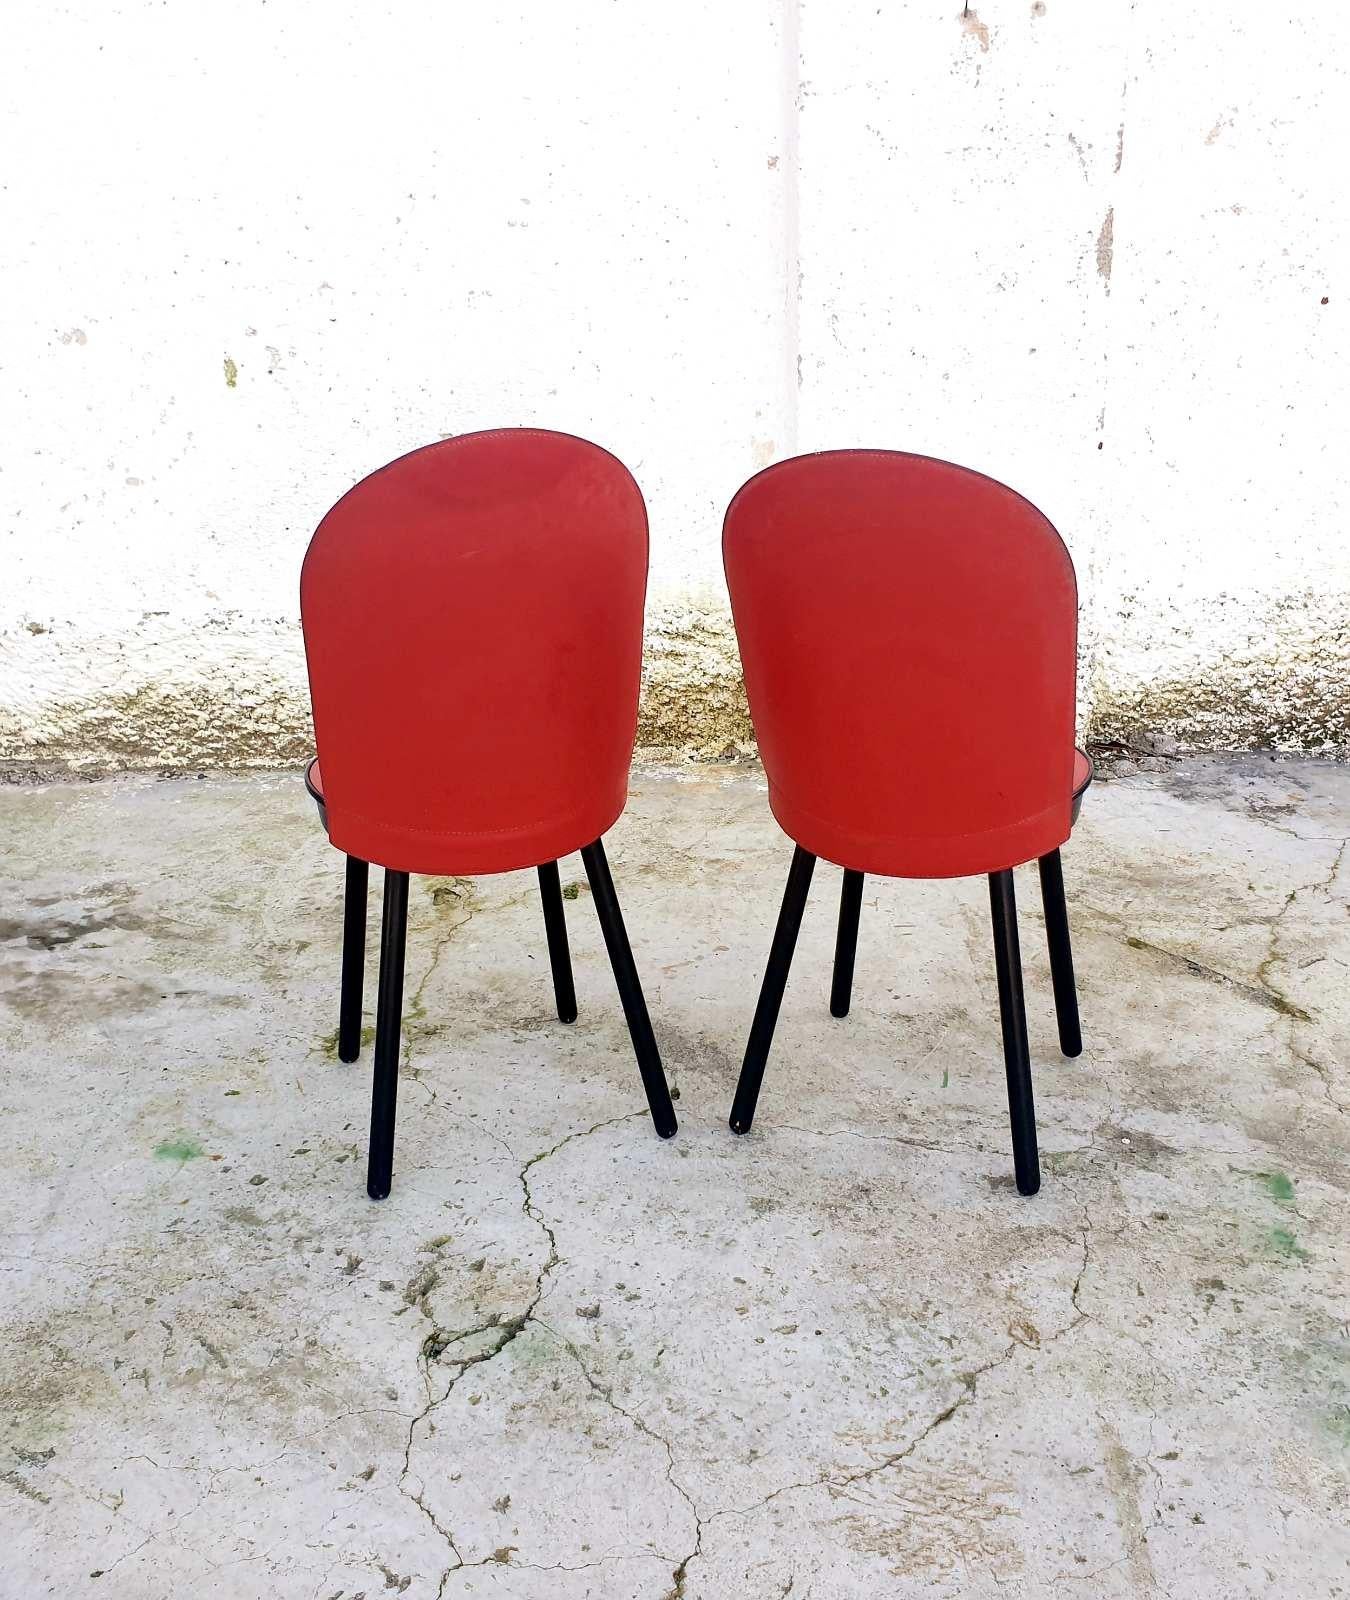 Late 20th Century Mid Century Red Leather Dining Chairs, Zanotta, Italy 80s, Pair For Sale